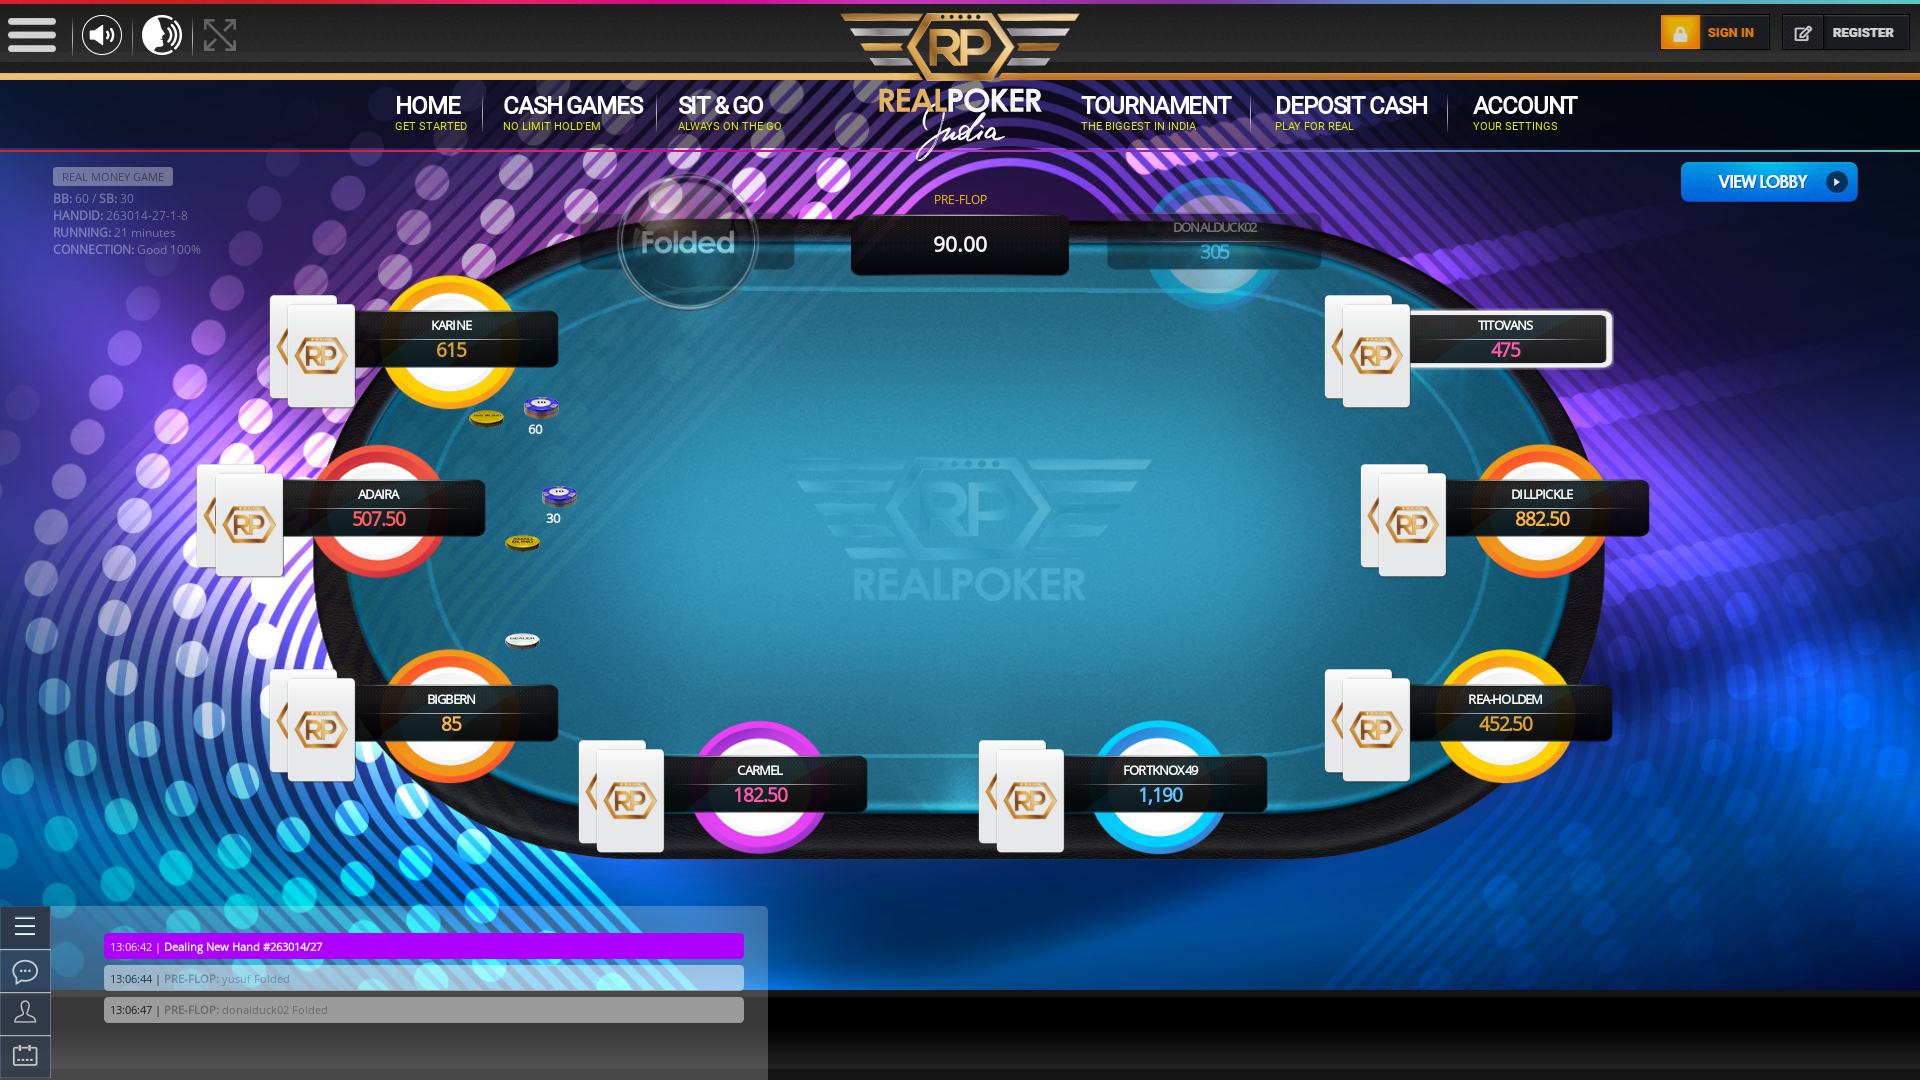 Real poker 10 player table in the 2 match